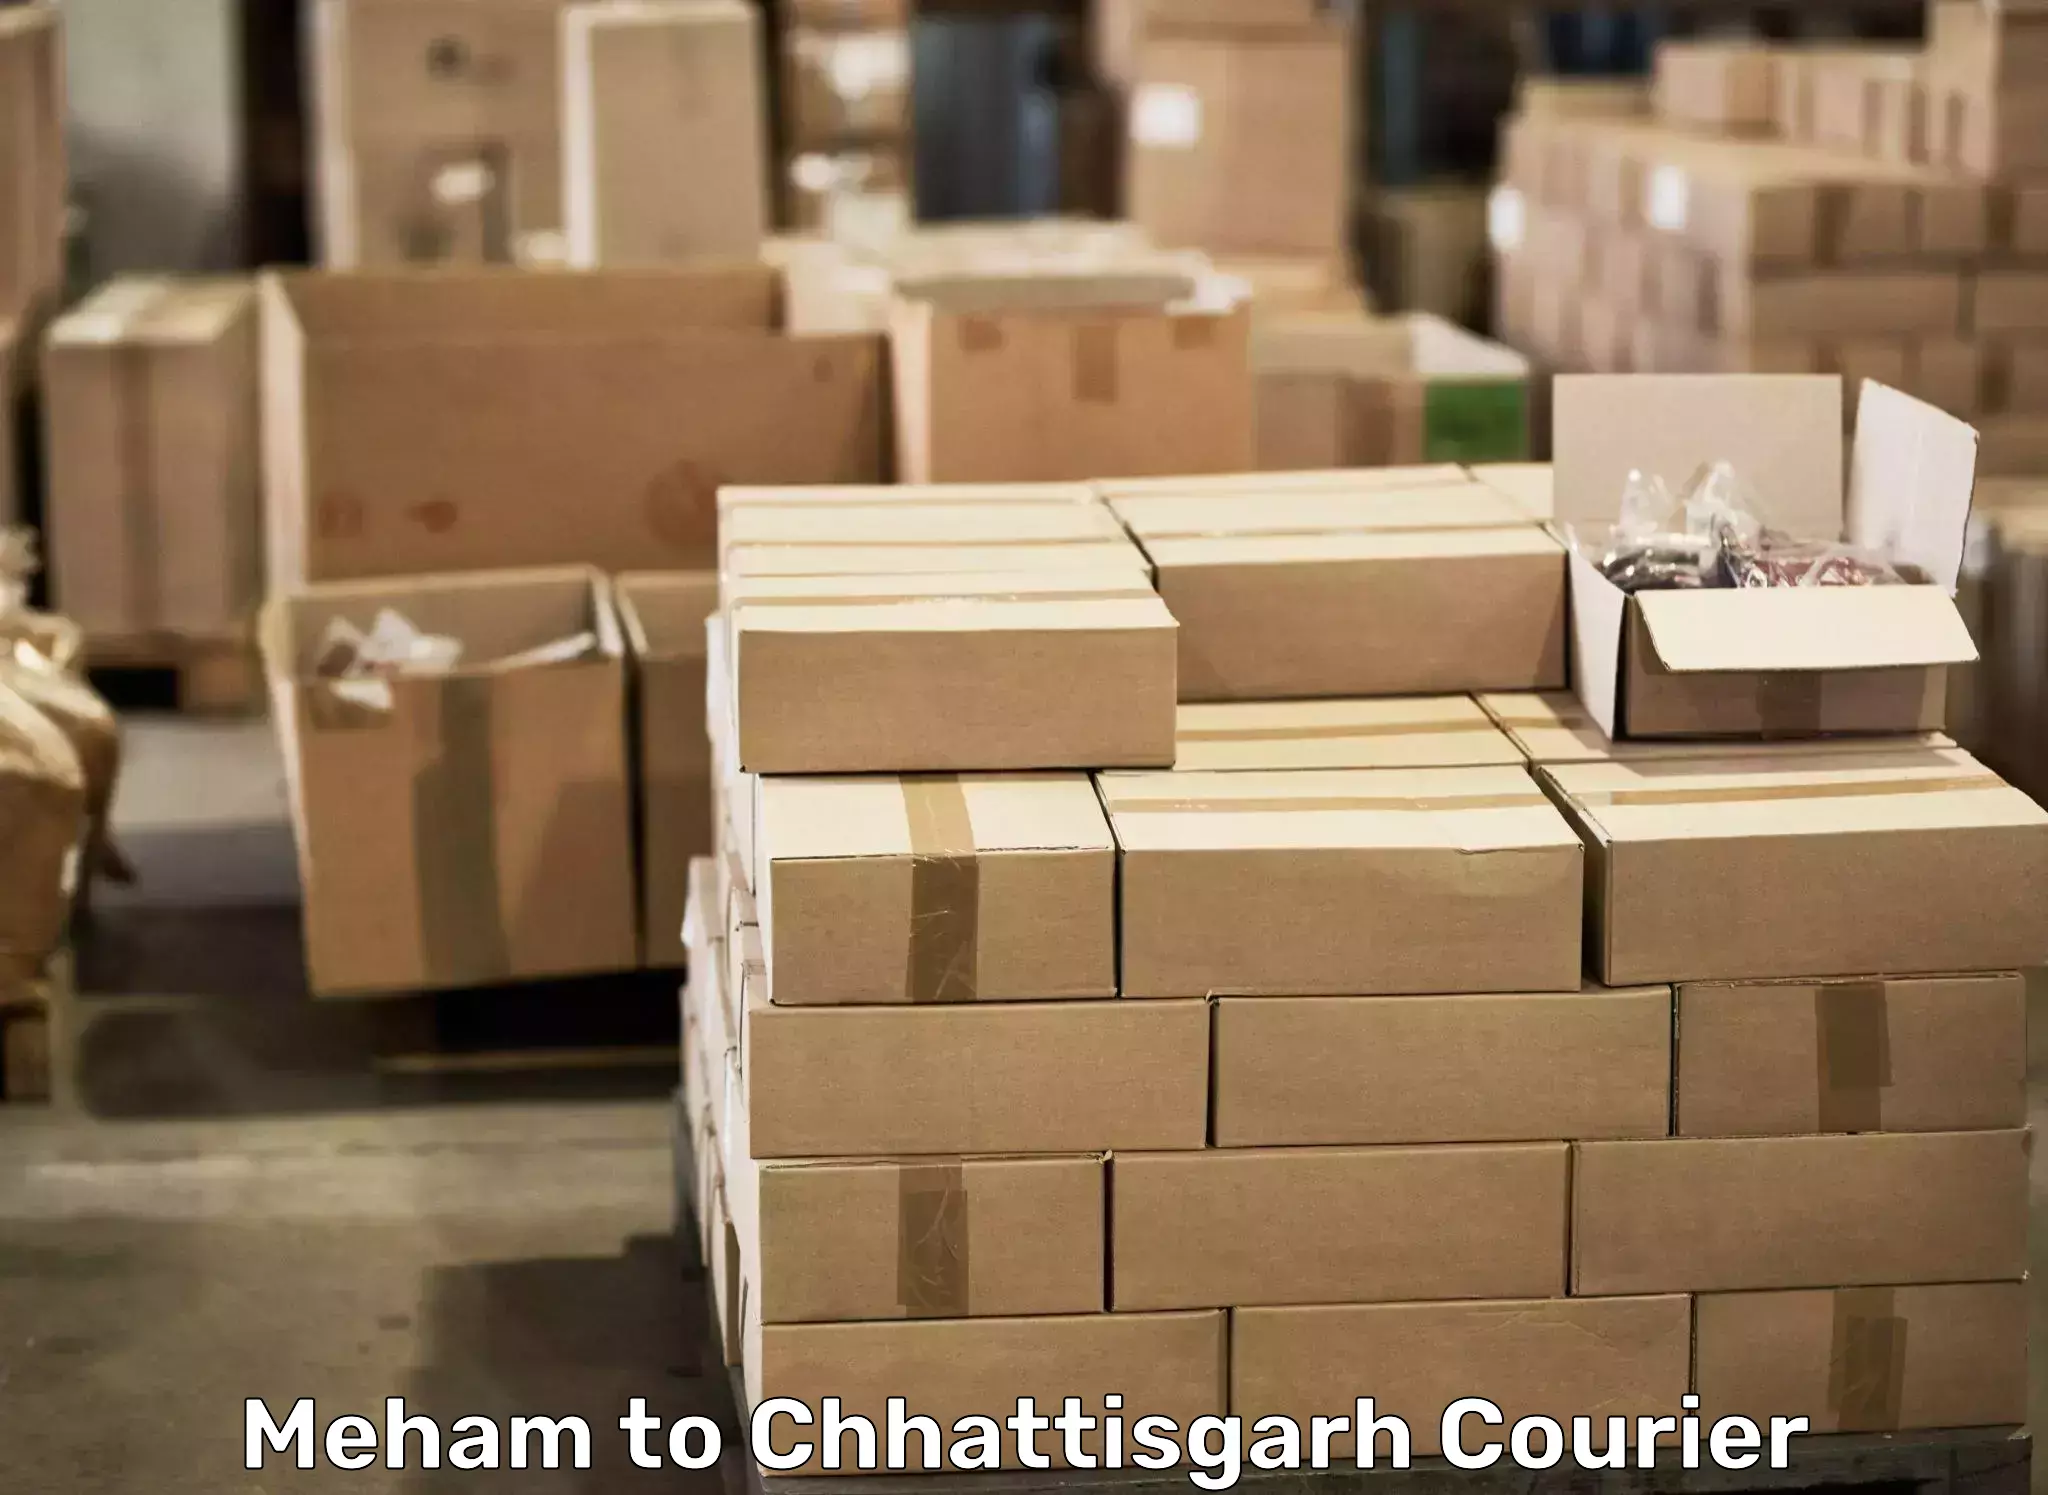 Efficient moving and packing Meham to Patna Chhattisgarh